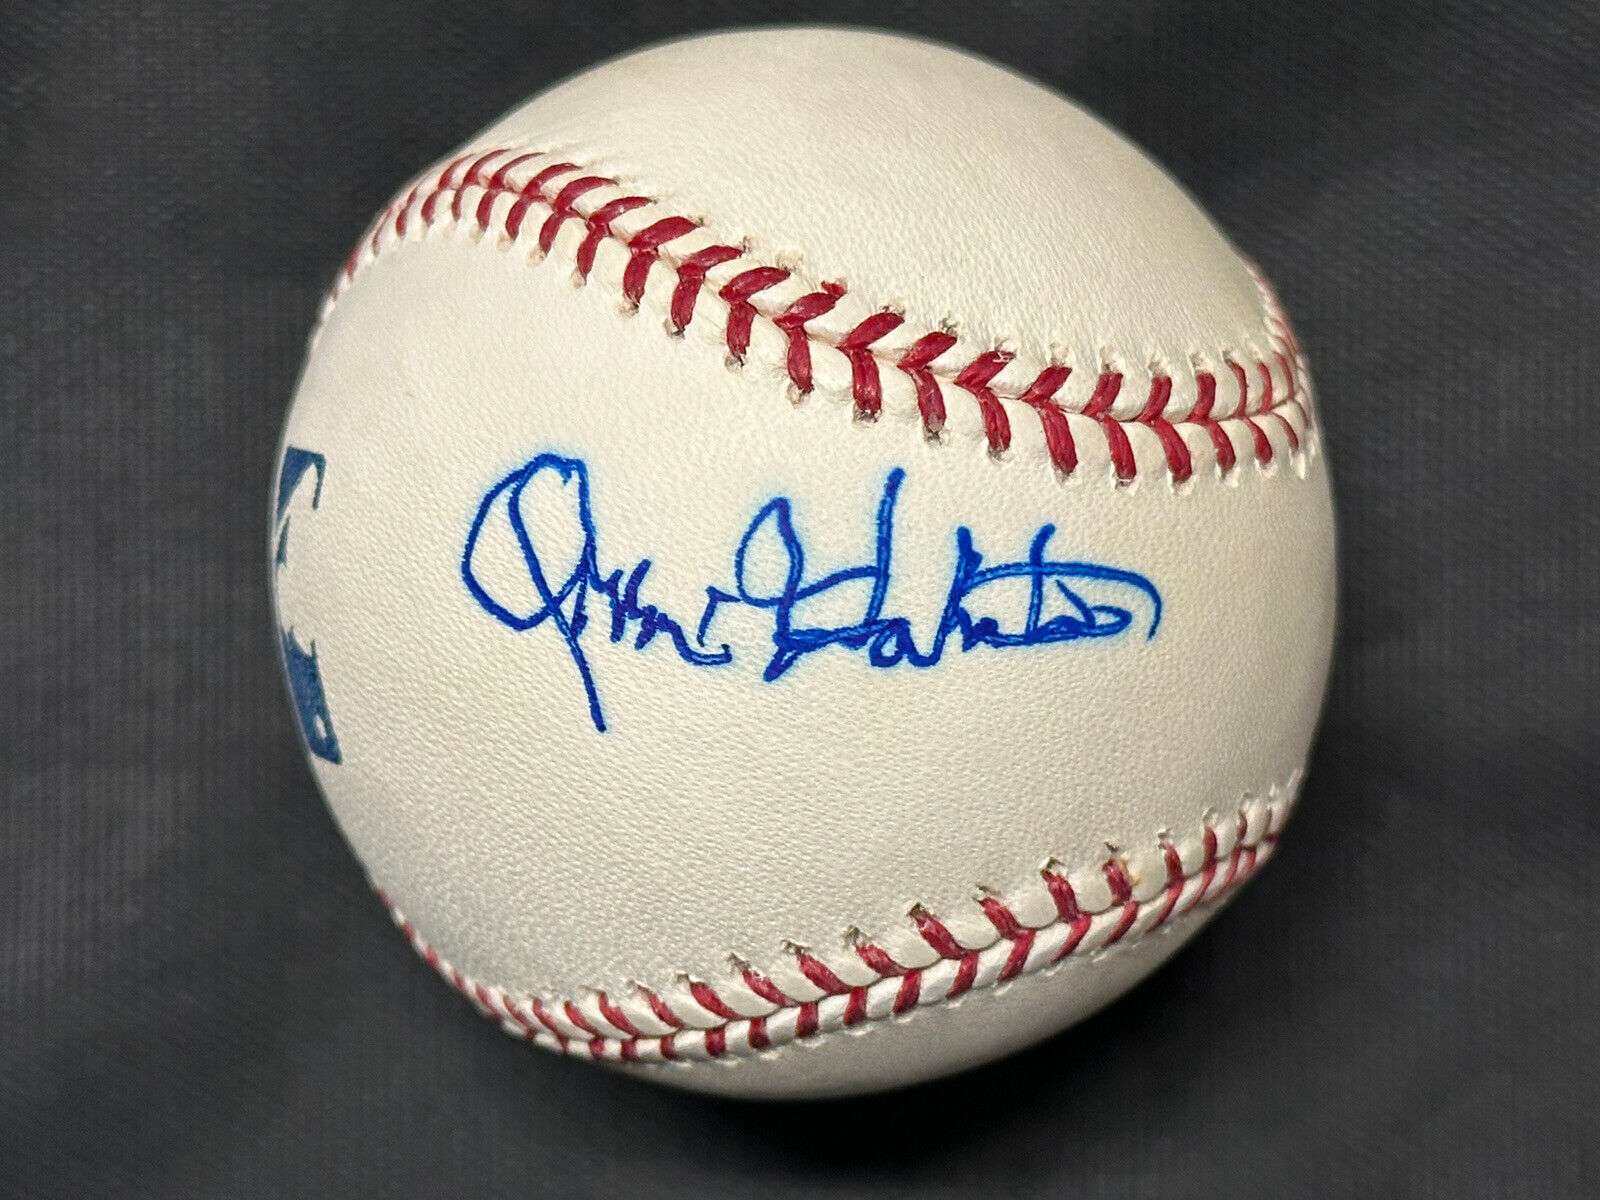 ORRIN HATCH HAND SIGNED AUTOGRAPHED MLB BASEBALL PSA/DNA CERTIFIED “VERY RARE”